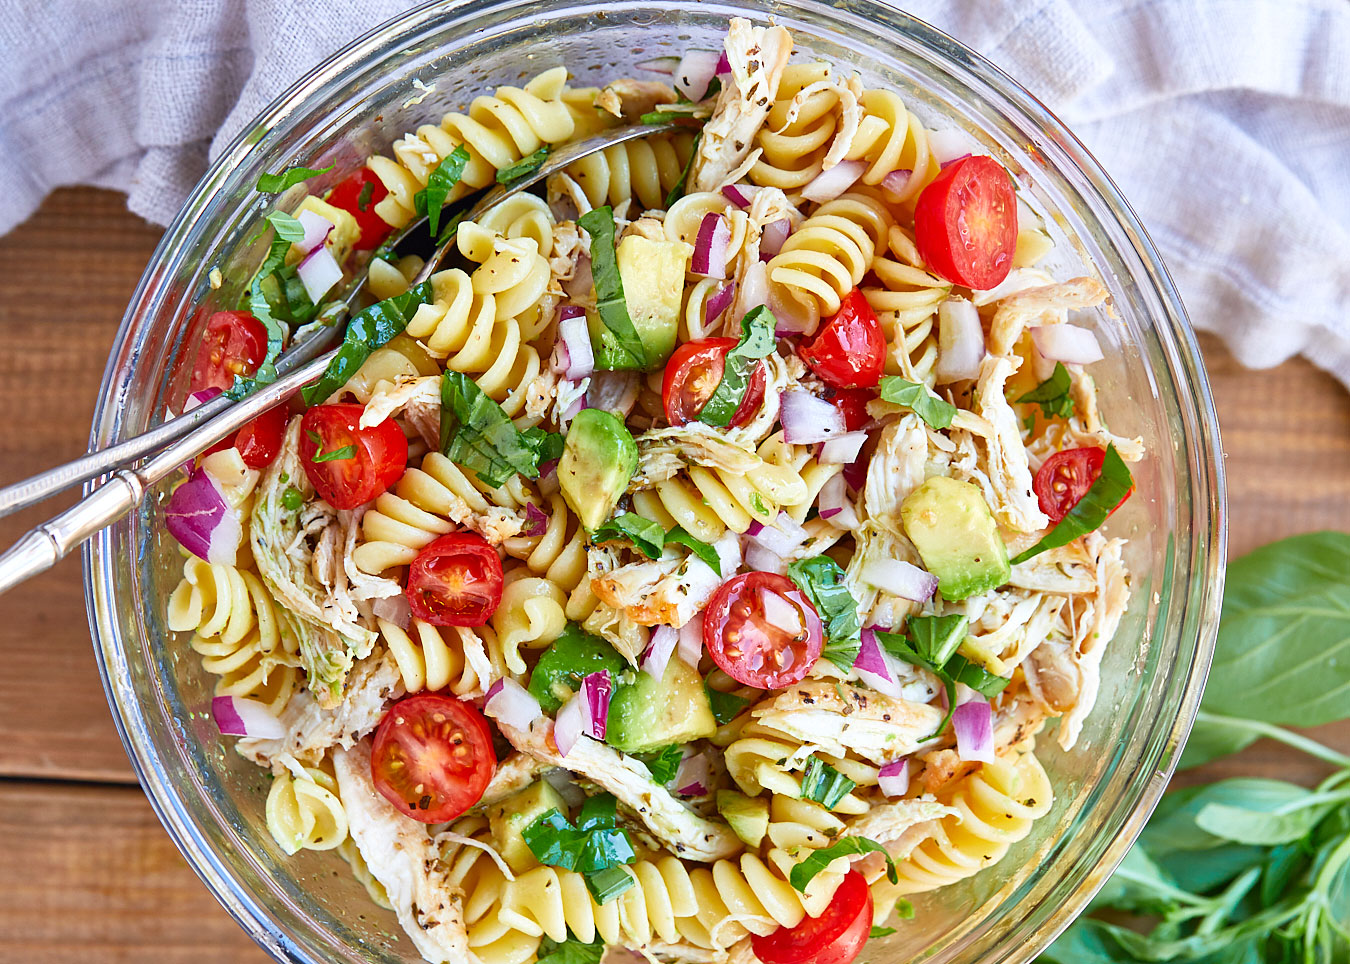 Picnic Salads: 21 Salad Recipes that are Perfect for a Picnic